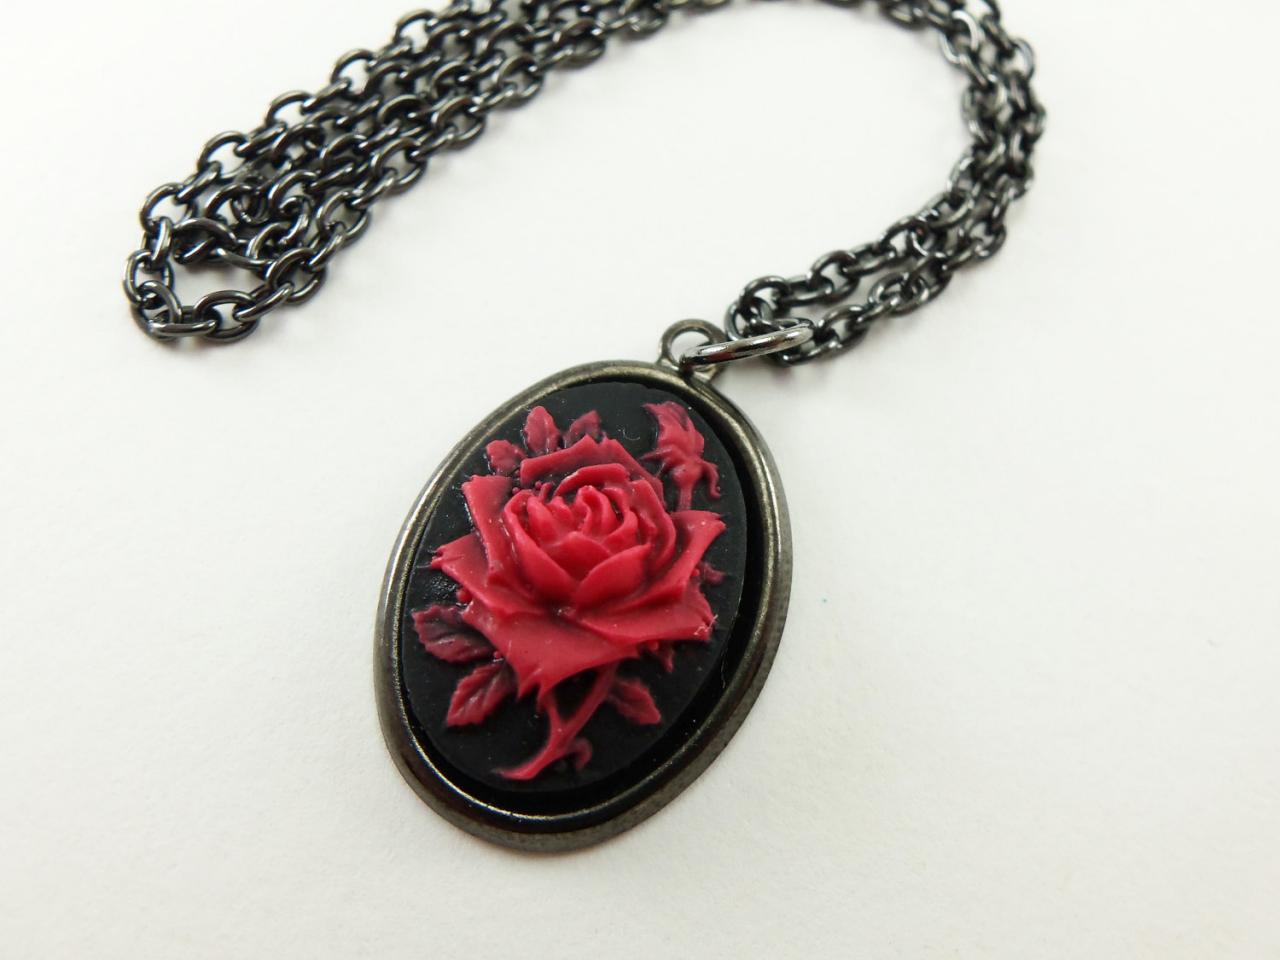 Black And Red Rose Necklace Dark Rose Jewelry Gunmetal Dark Silver Necklace Victorian Style Jewelry